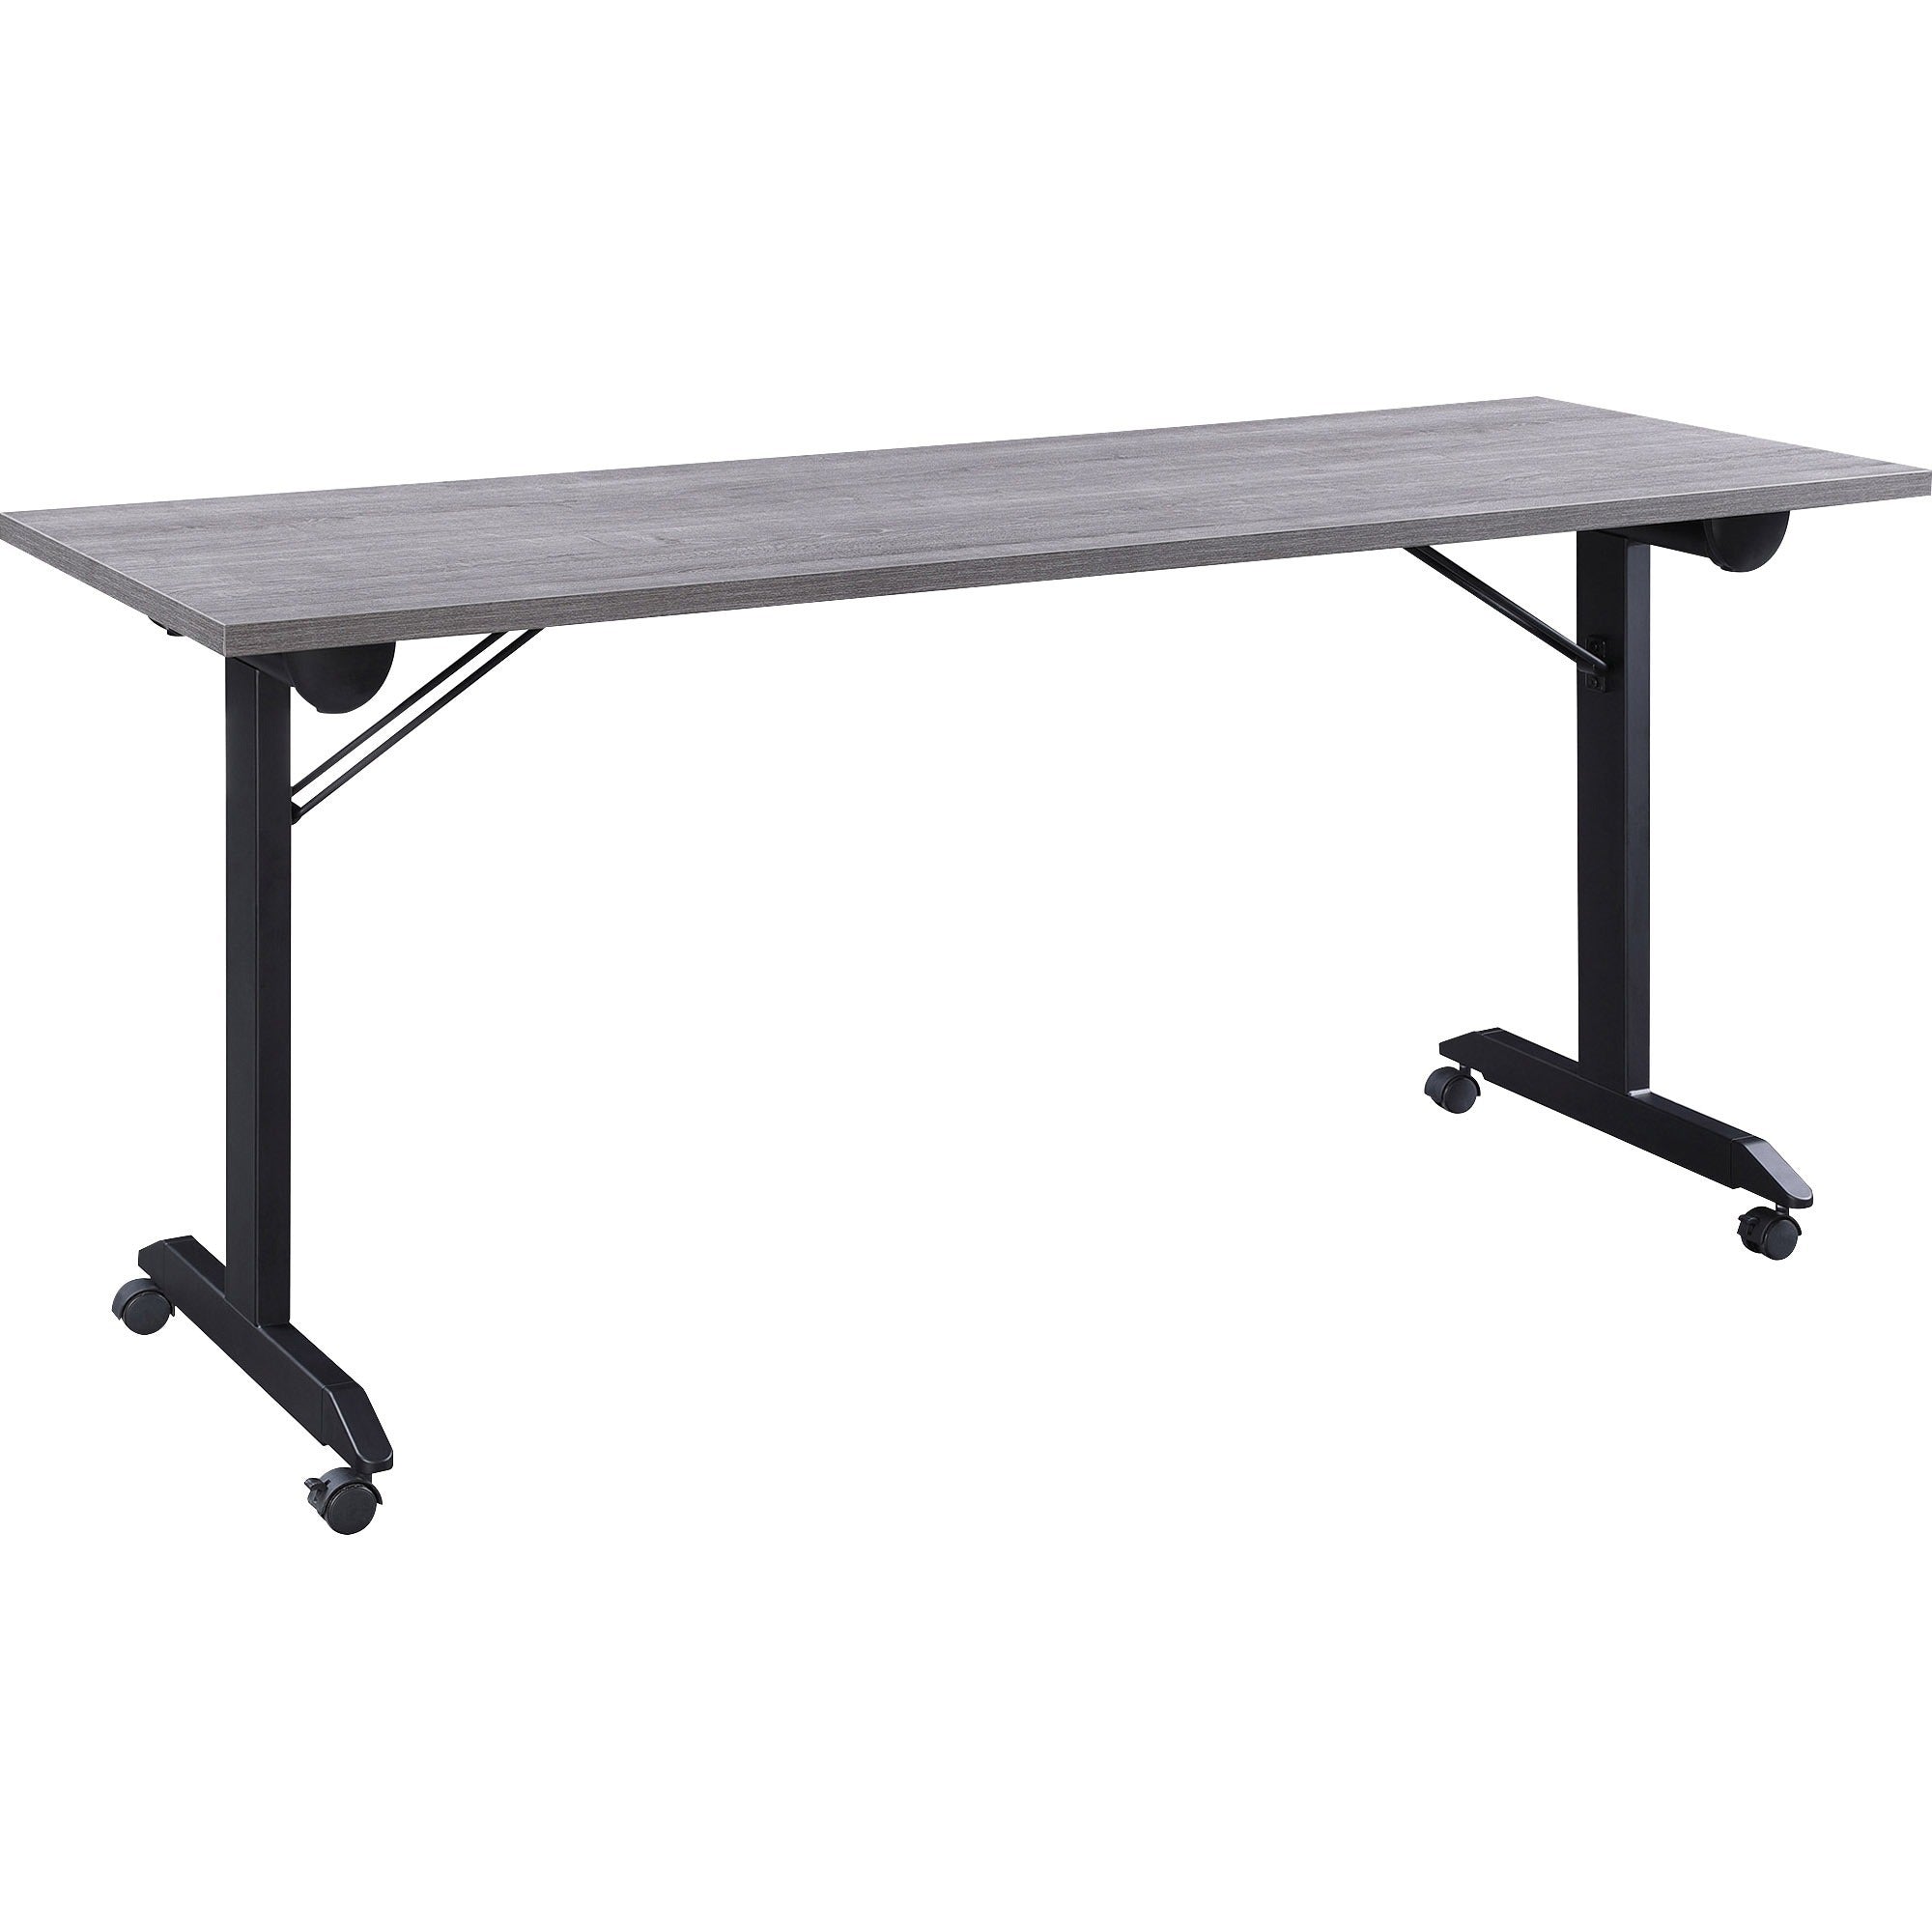 lorell-mobile-folding-training-table-for-table-toprectangle-top-powder-coated-base-200-lb-capacity-x-63-table-top-width-2950-height-x-63-width-x-2950-depth-assembly-required-gray-1-each_llr60741 - 1